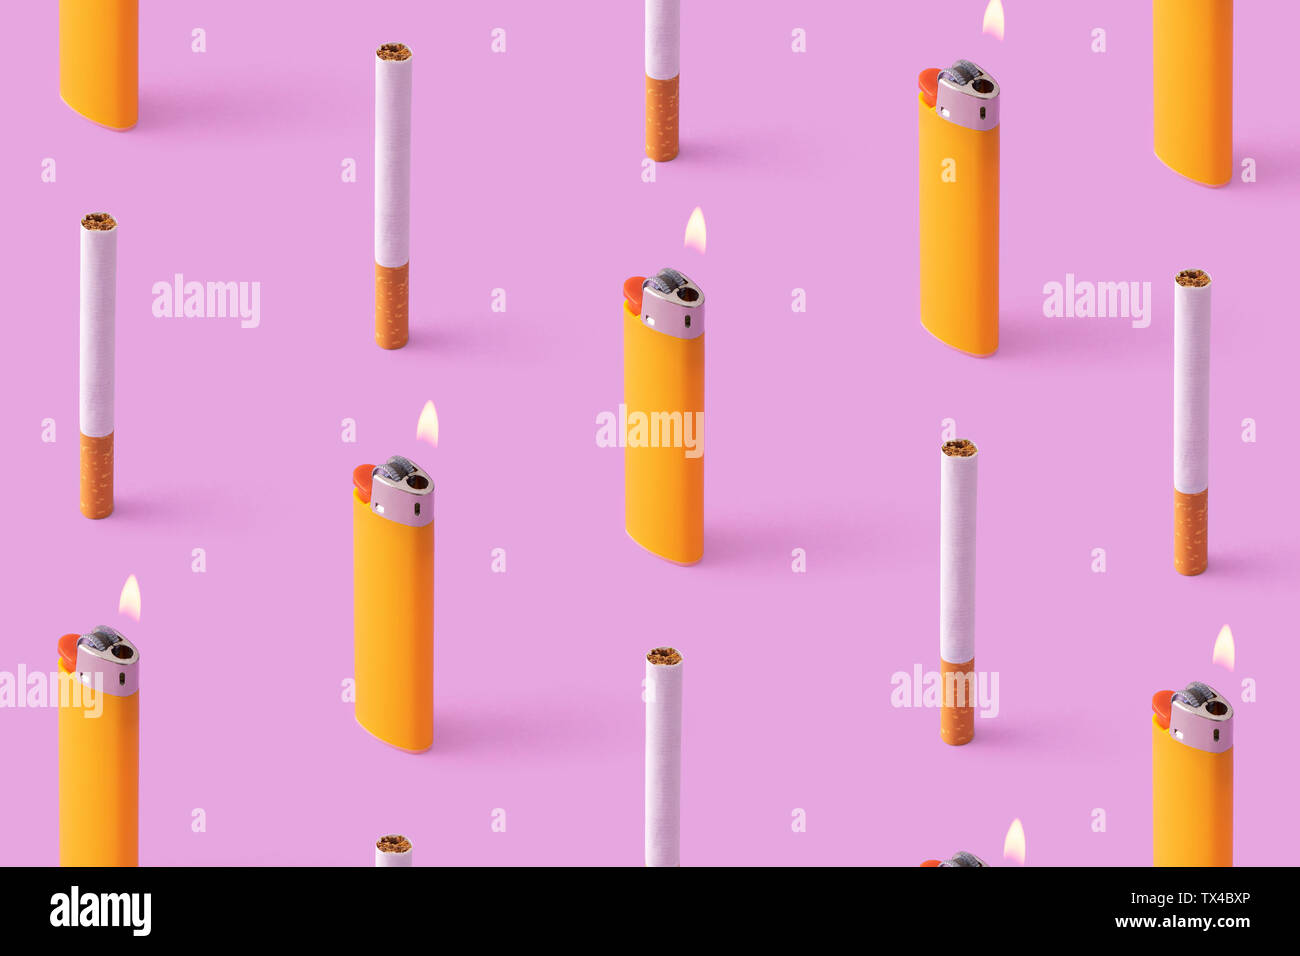 Rows of cigarettes and burning lighters on purple background Stock Photo